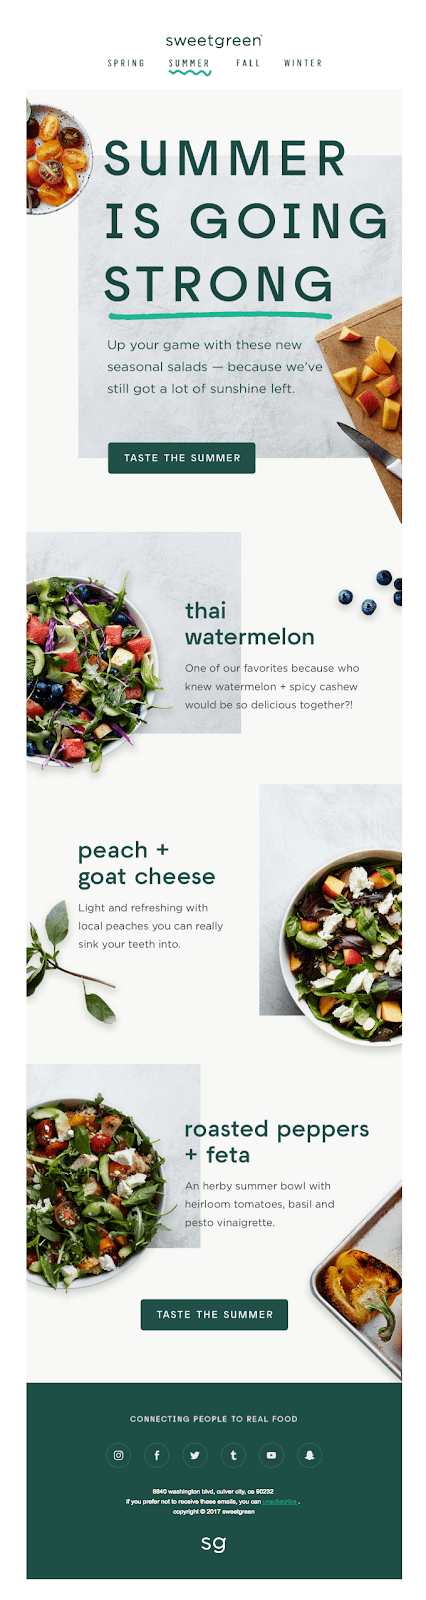 sweetgreen home page